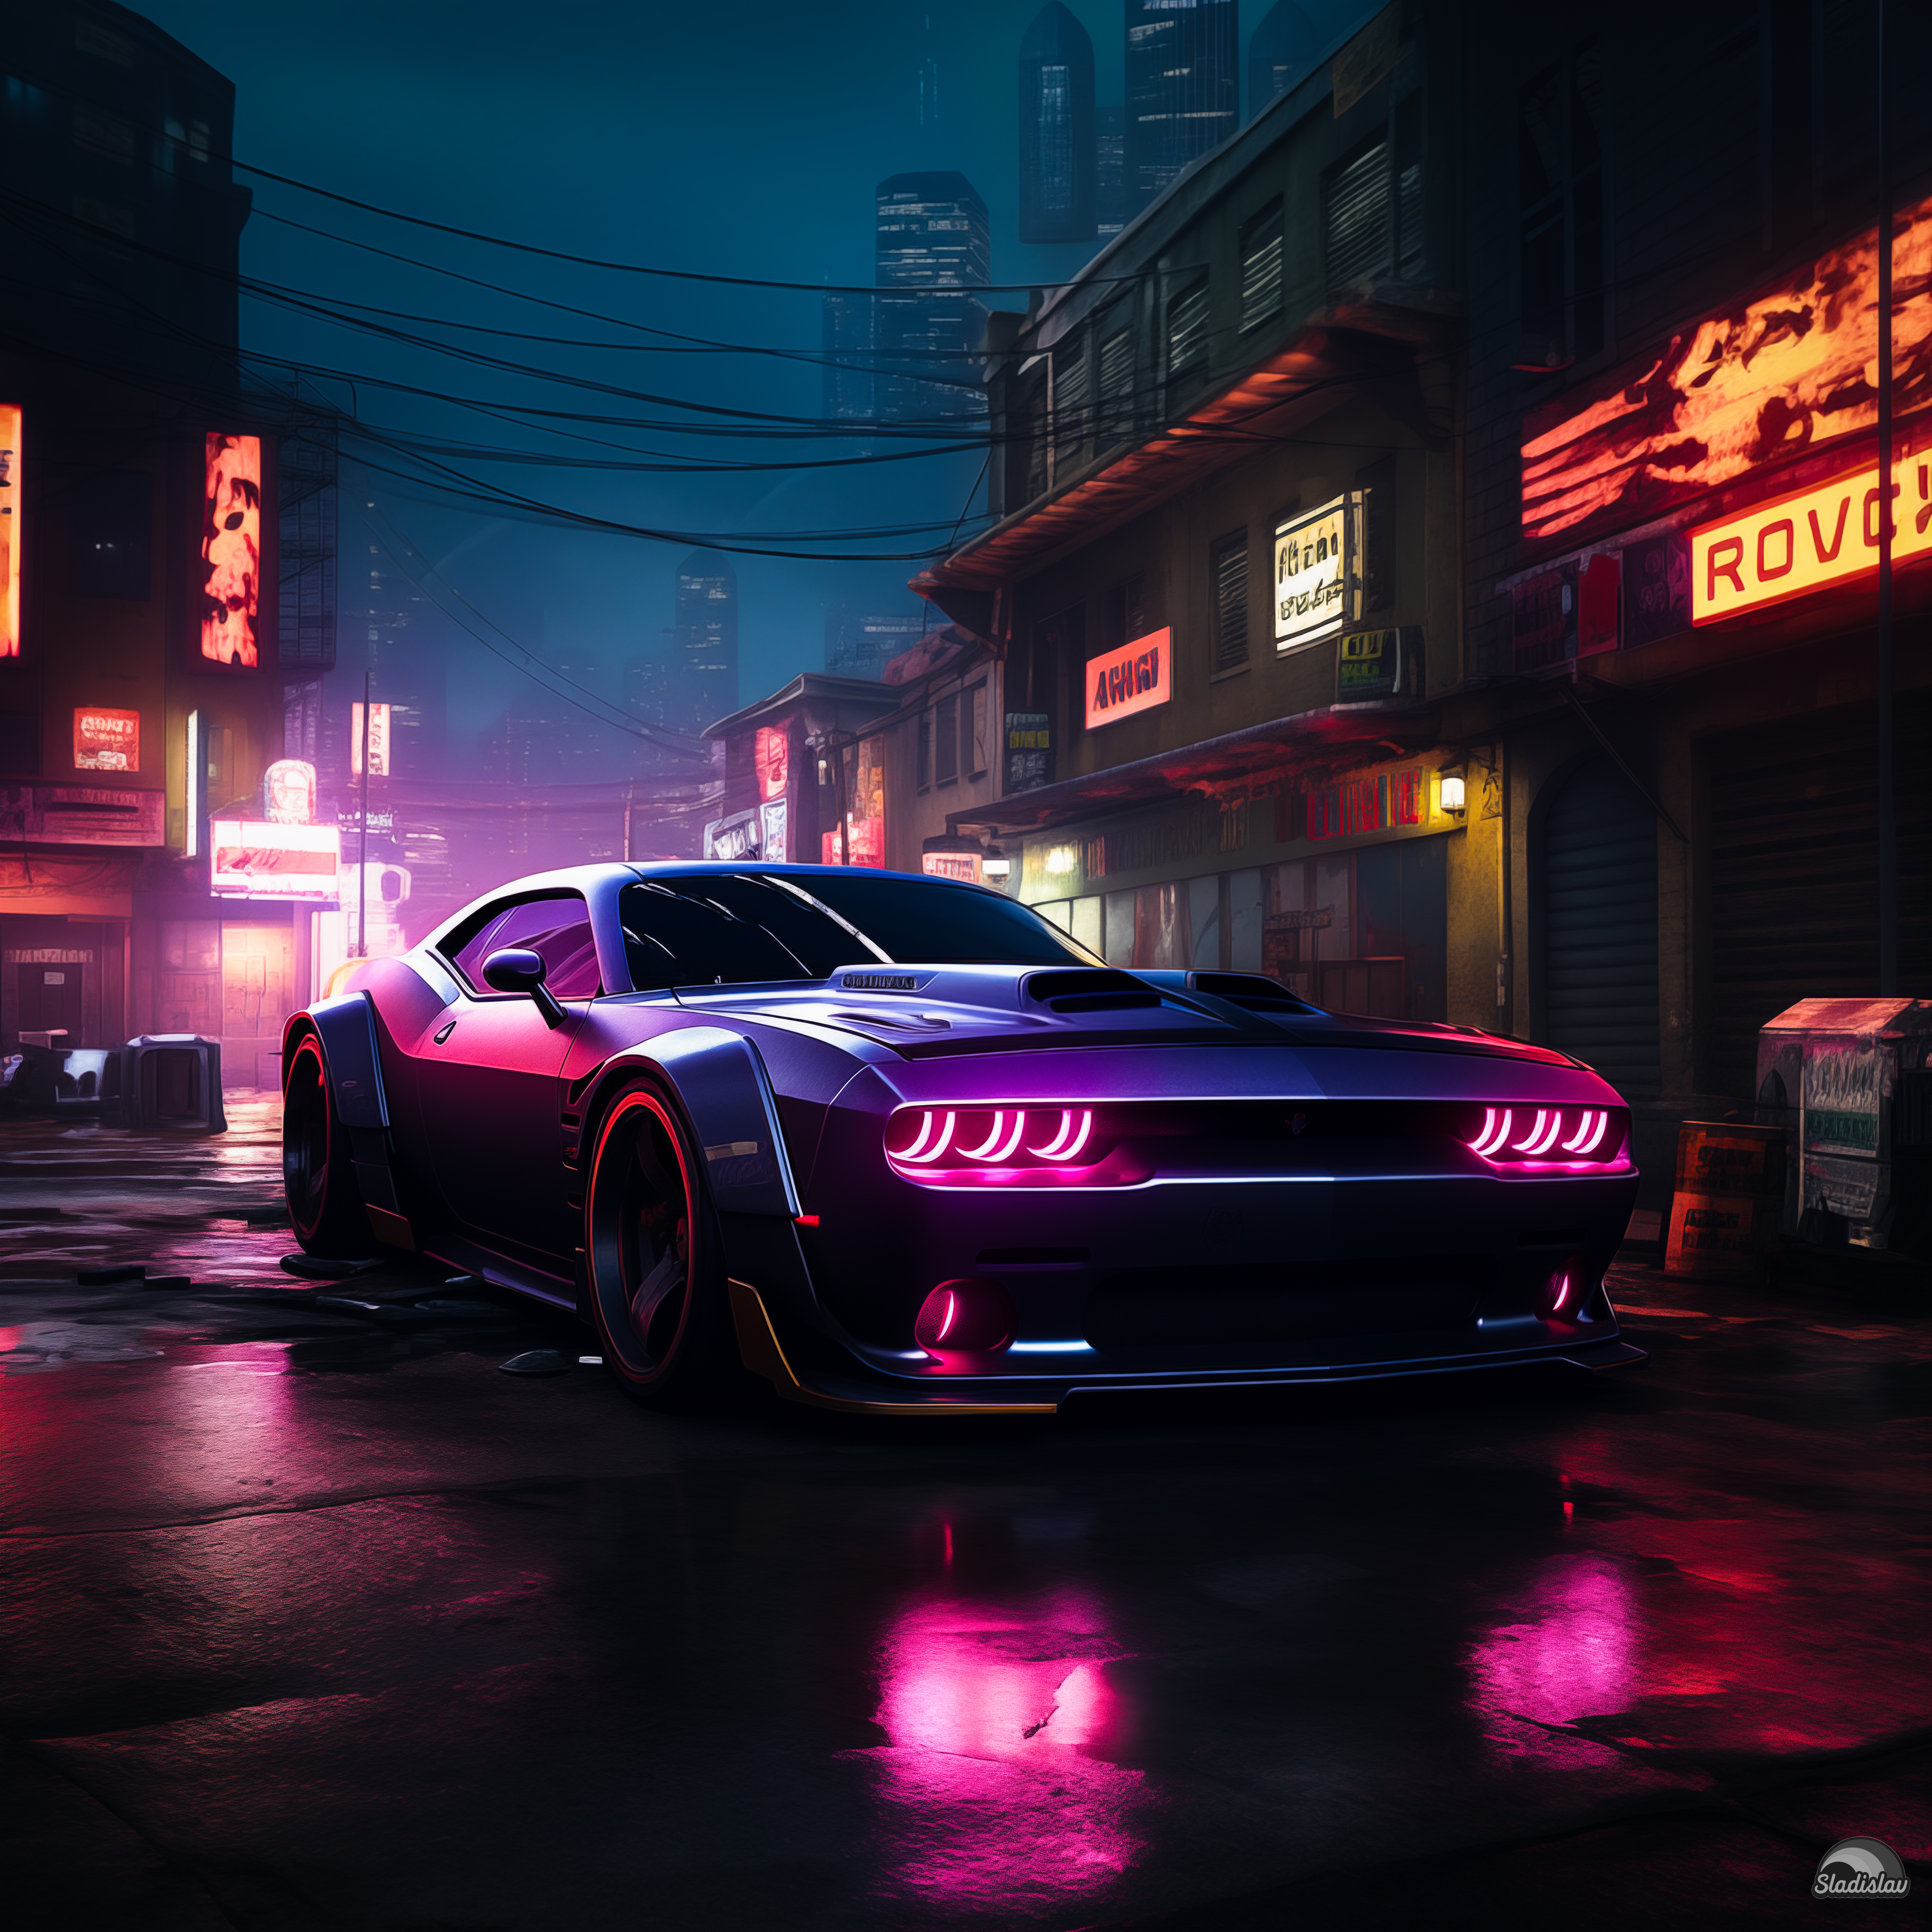 General 4096x4096 AI art Dodge Challenger cyberpunk vehicle frontal view headlights building night sky city lights watermarked car sign city cables neon wet wet road depth of field